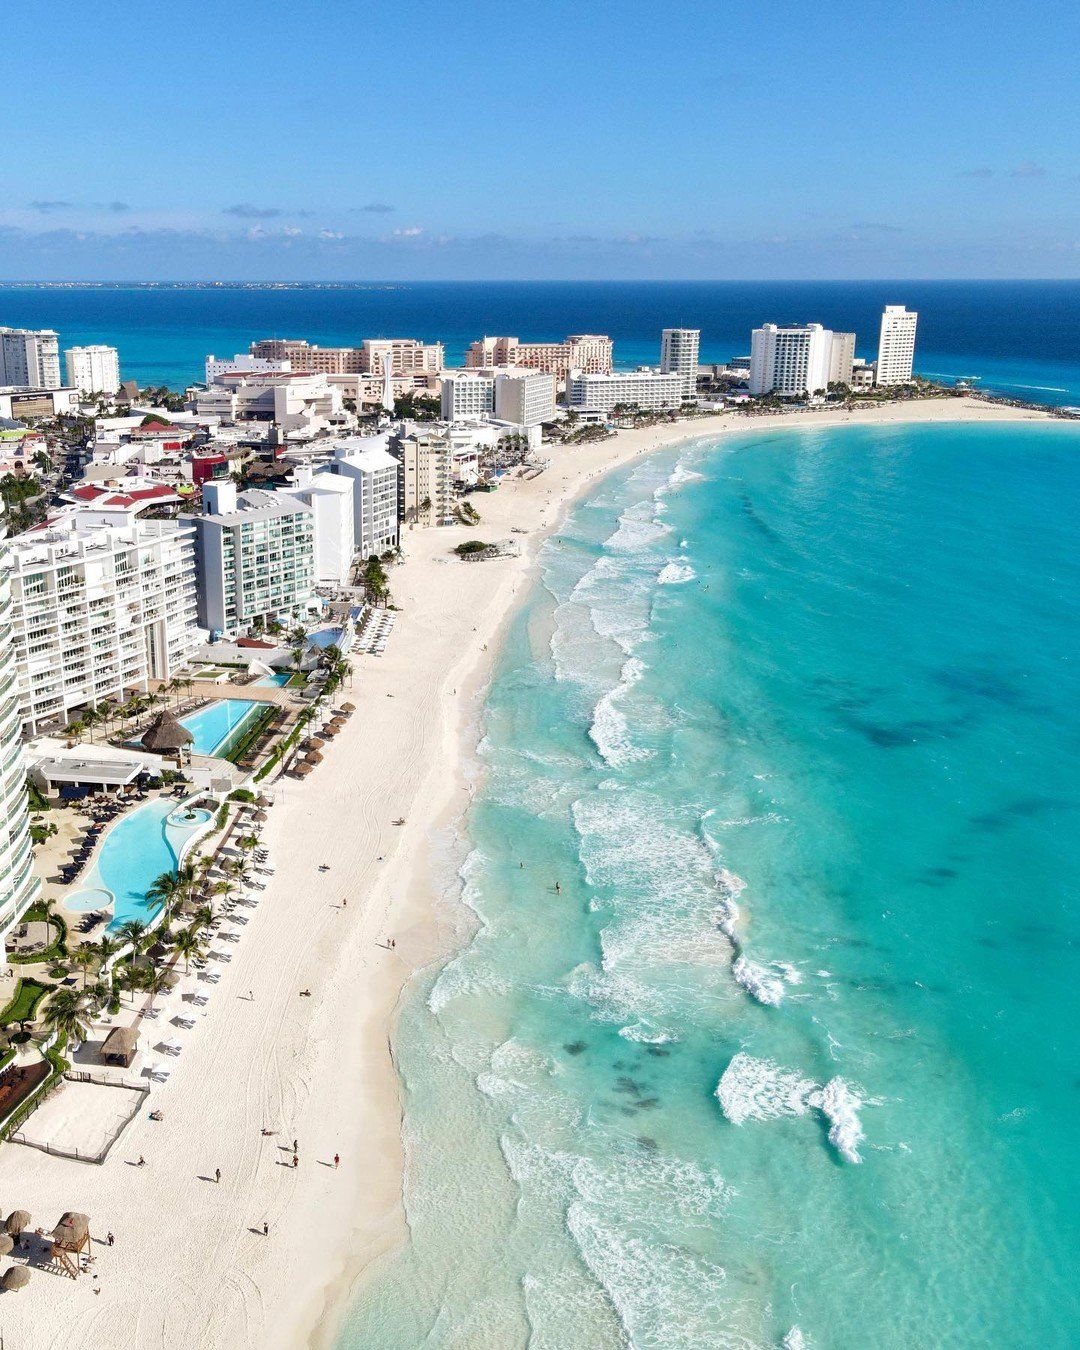 United Airlines - DFW To Cancun - 55% OFF ($222 Round Trip)